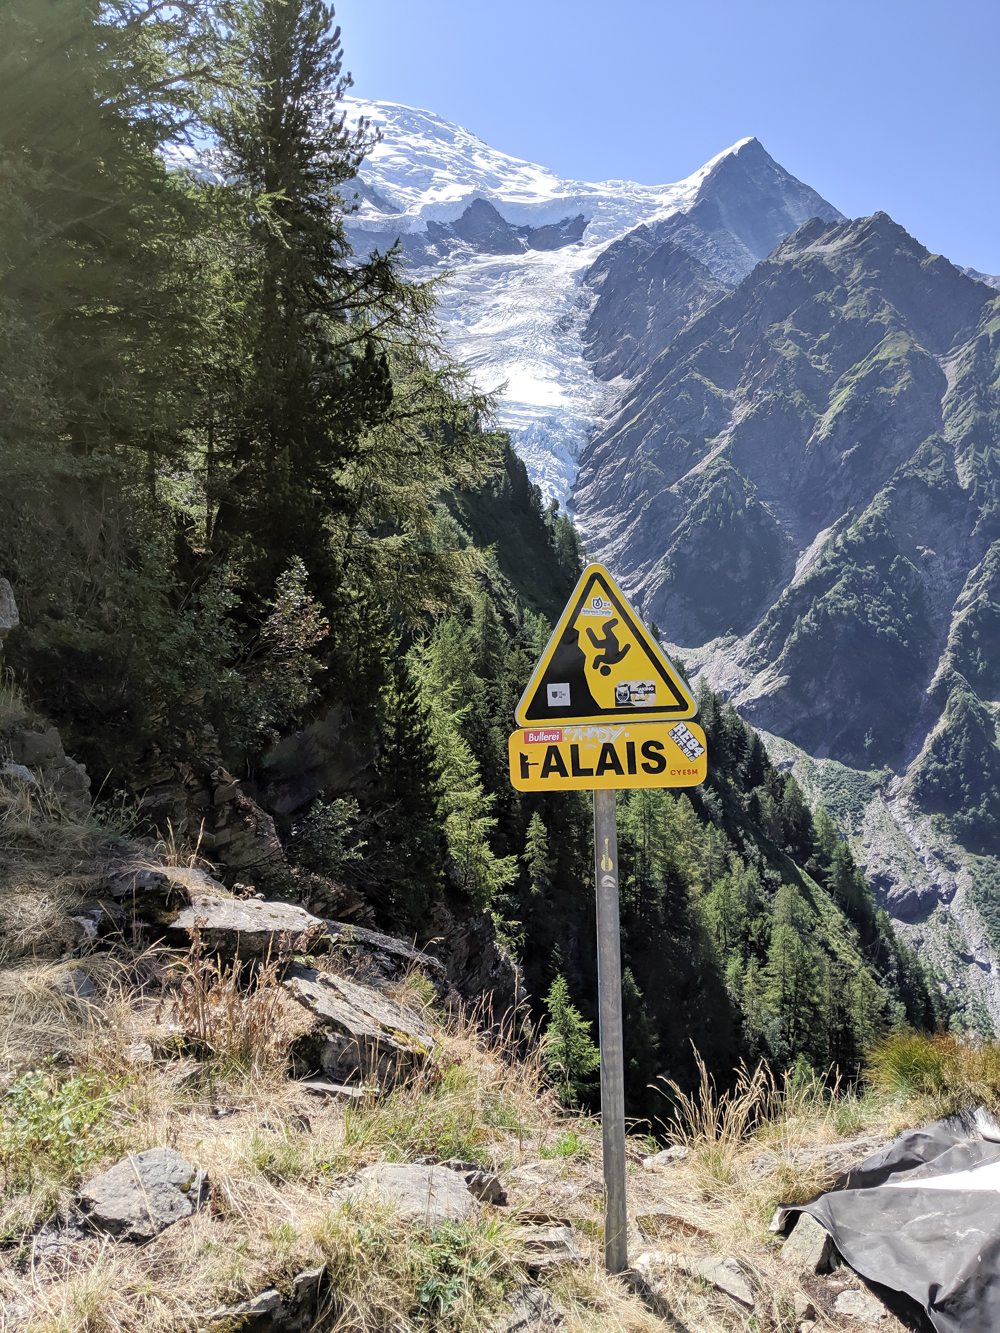 Best hikes in Chamonix: Plan de l'Aiguille to Mer de Glace and Montenvers on the Grand Balcon Nord / best day hikes in Chamonix / Mer de glace glacier, hiking in chamonix / falling hazard